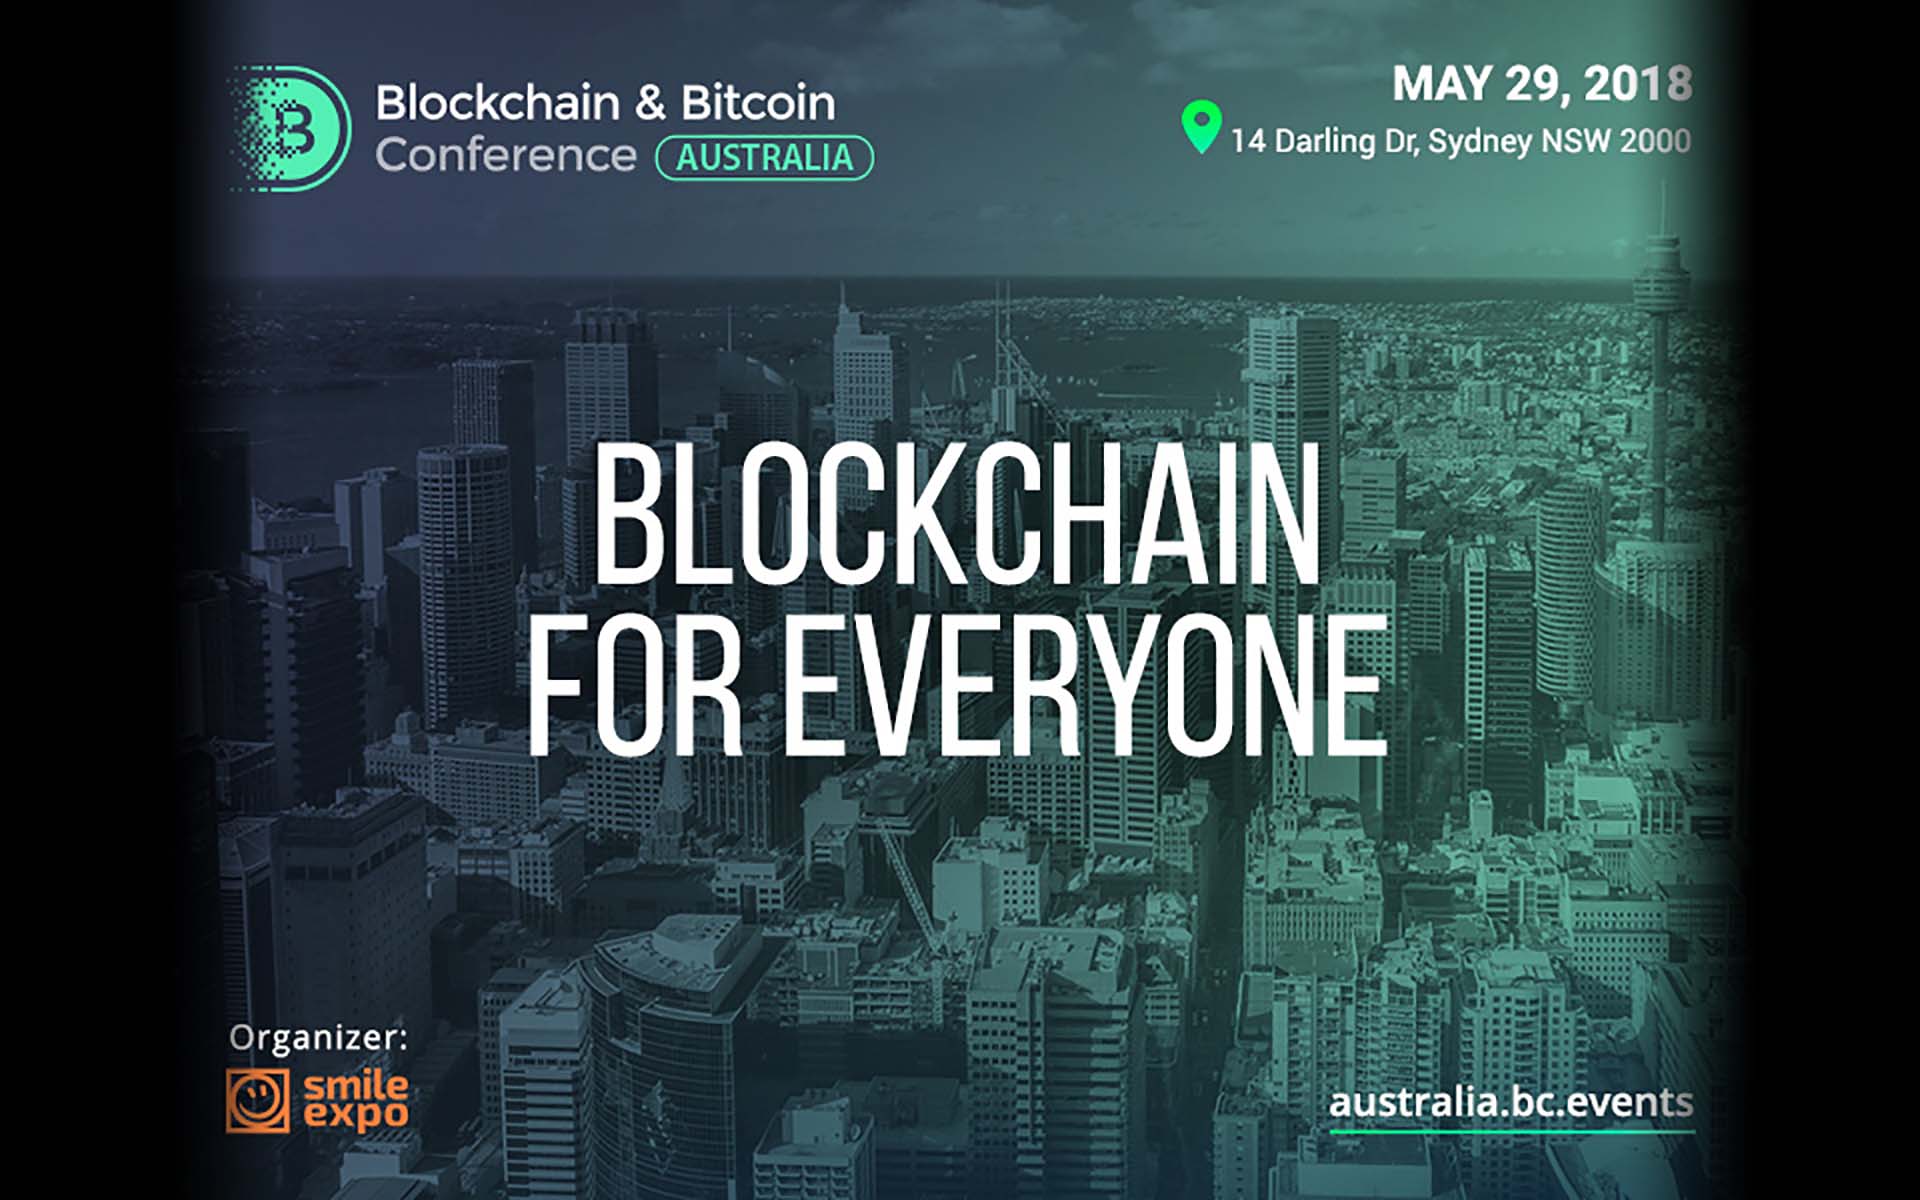 Blockchain & Bitcoin Conference Australia Will Bring Top Experts Together